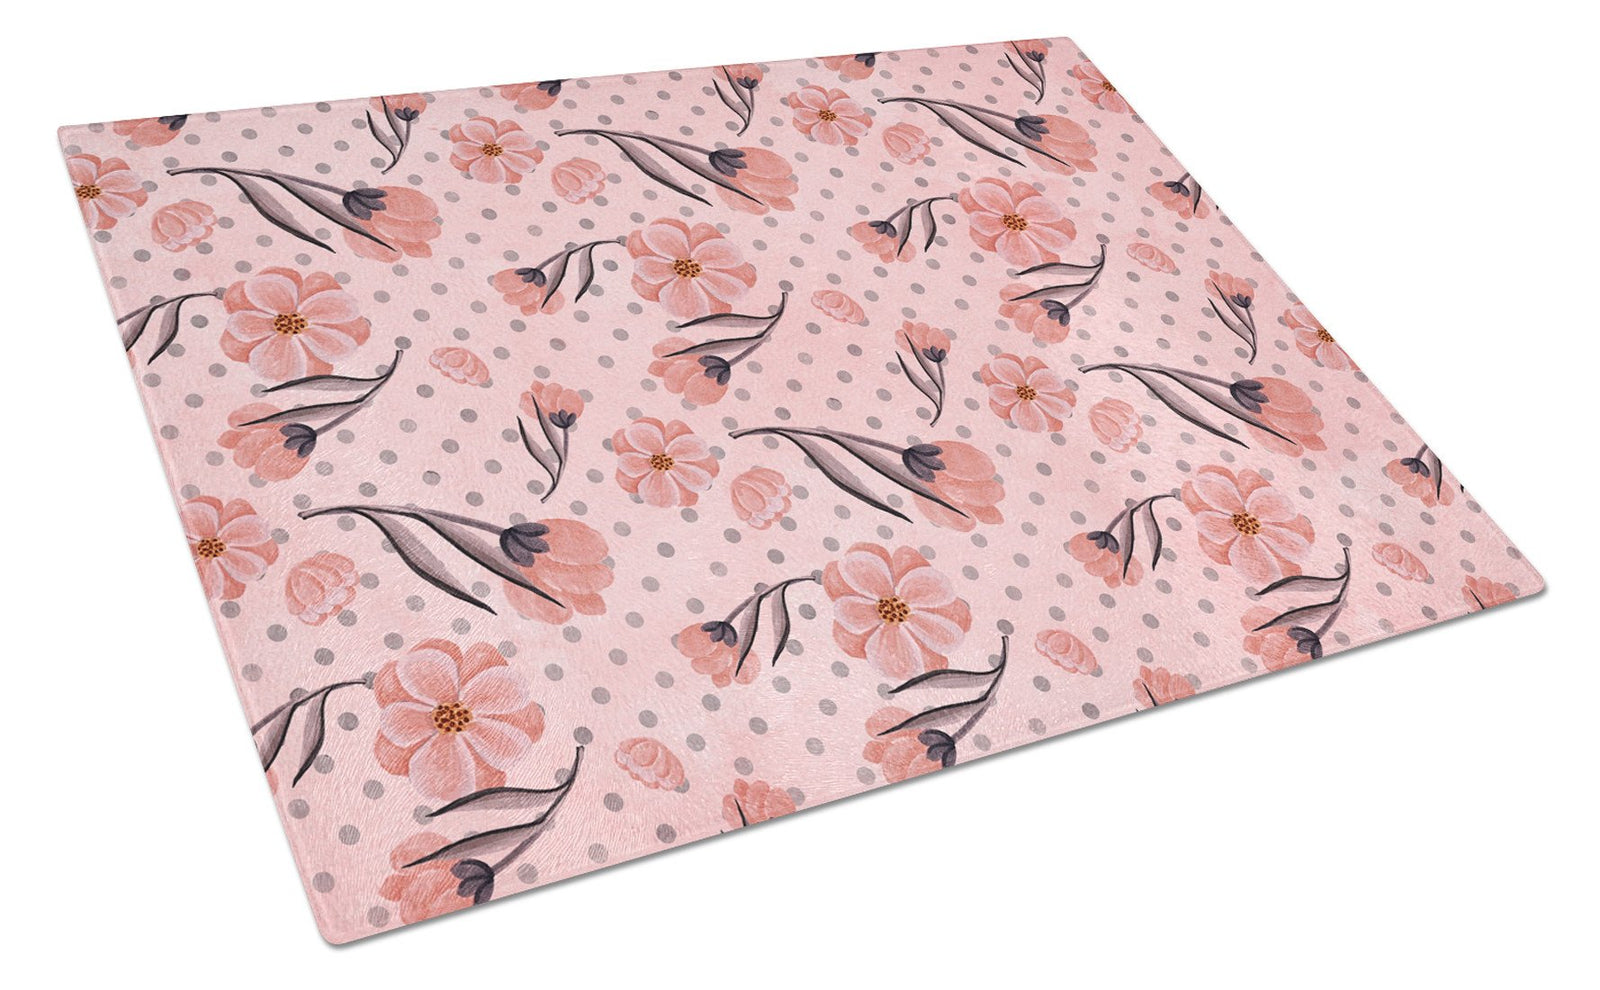 Pink Flowers and Polka Dots Glass Cutting Board Large BB7499LCB by Caroline's Treasures